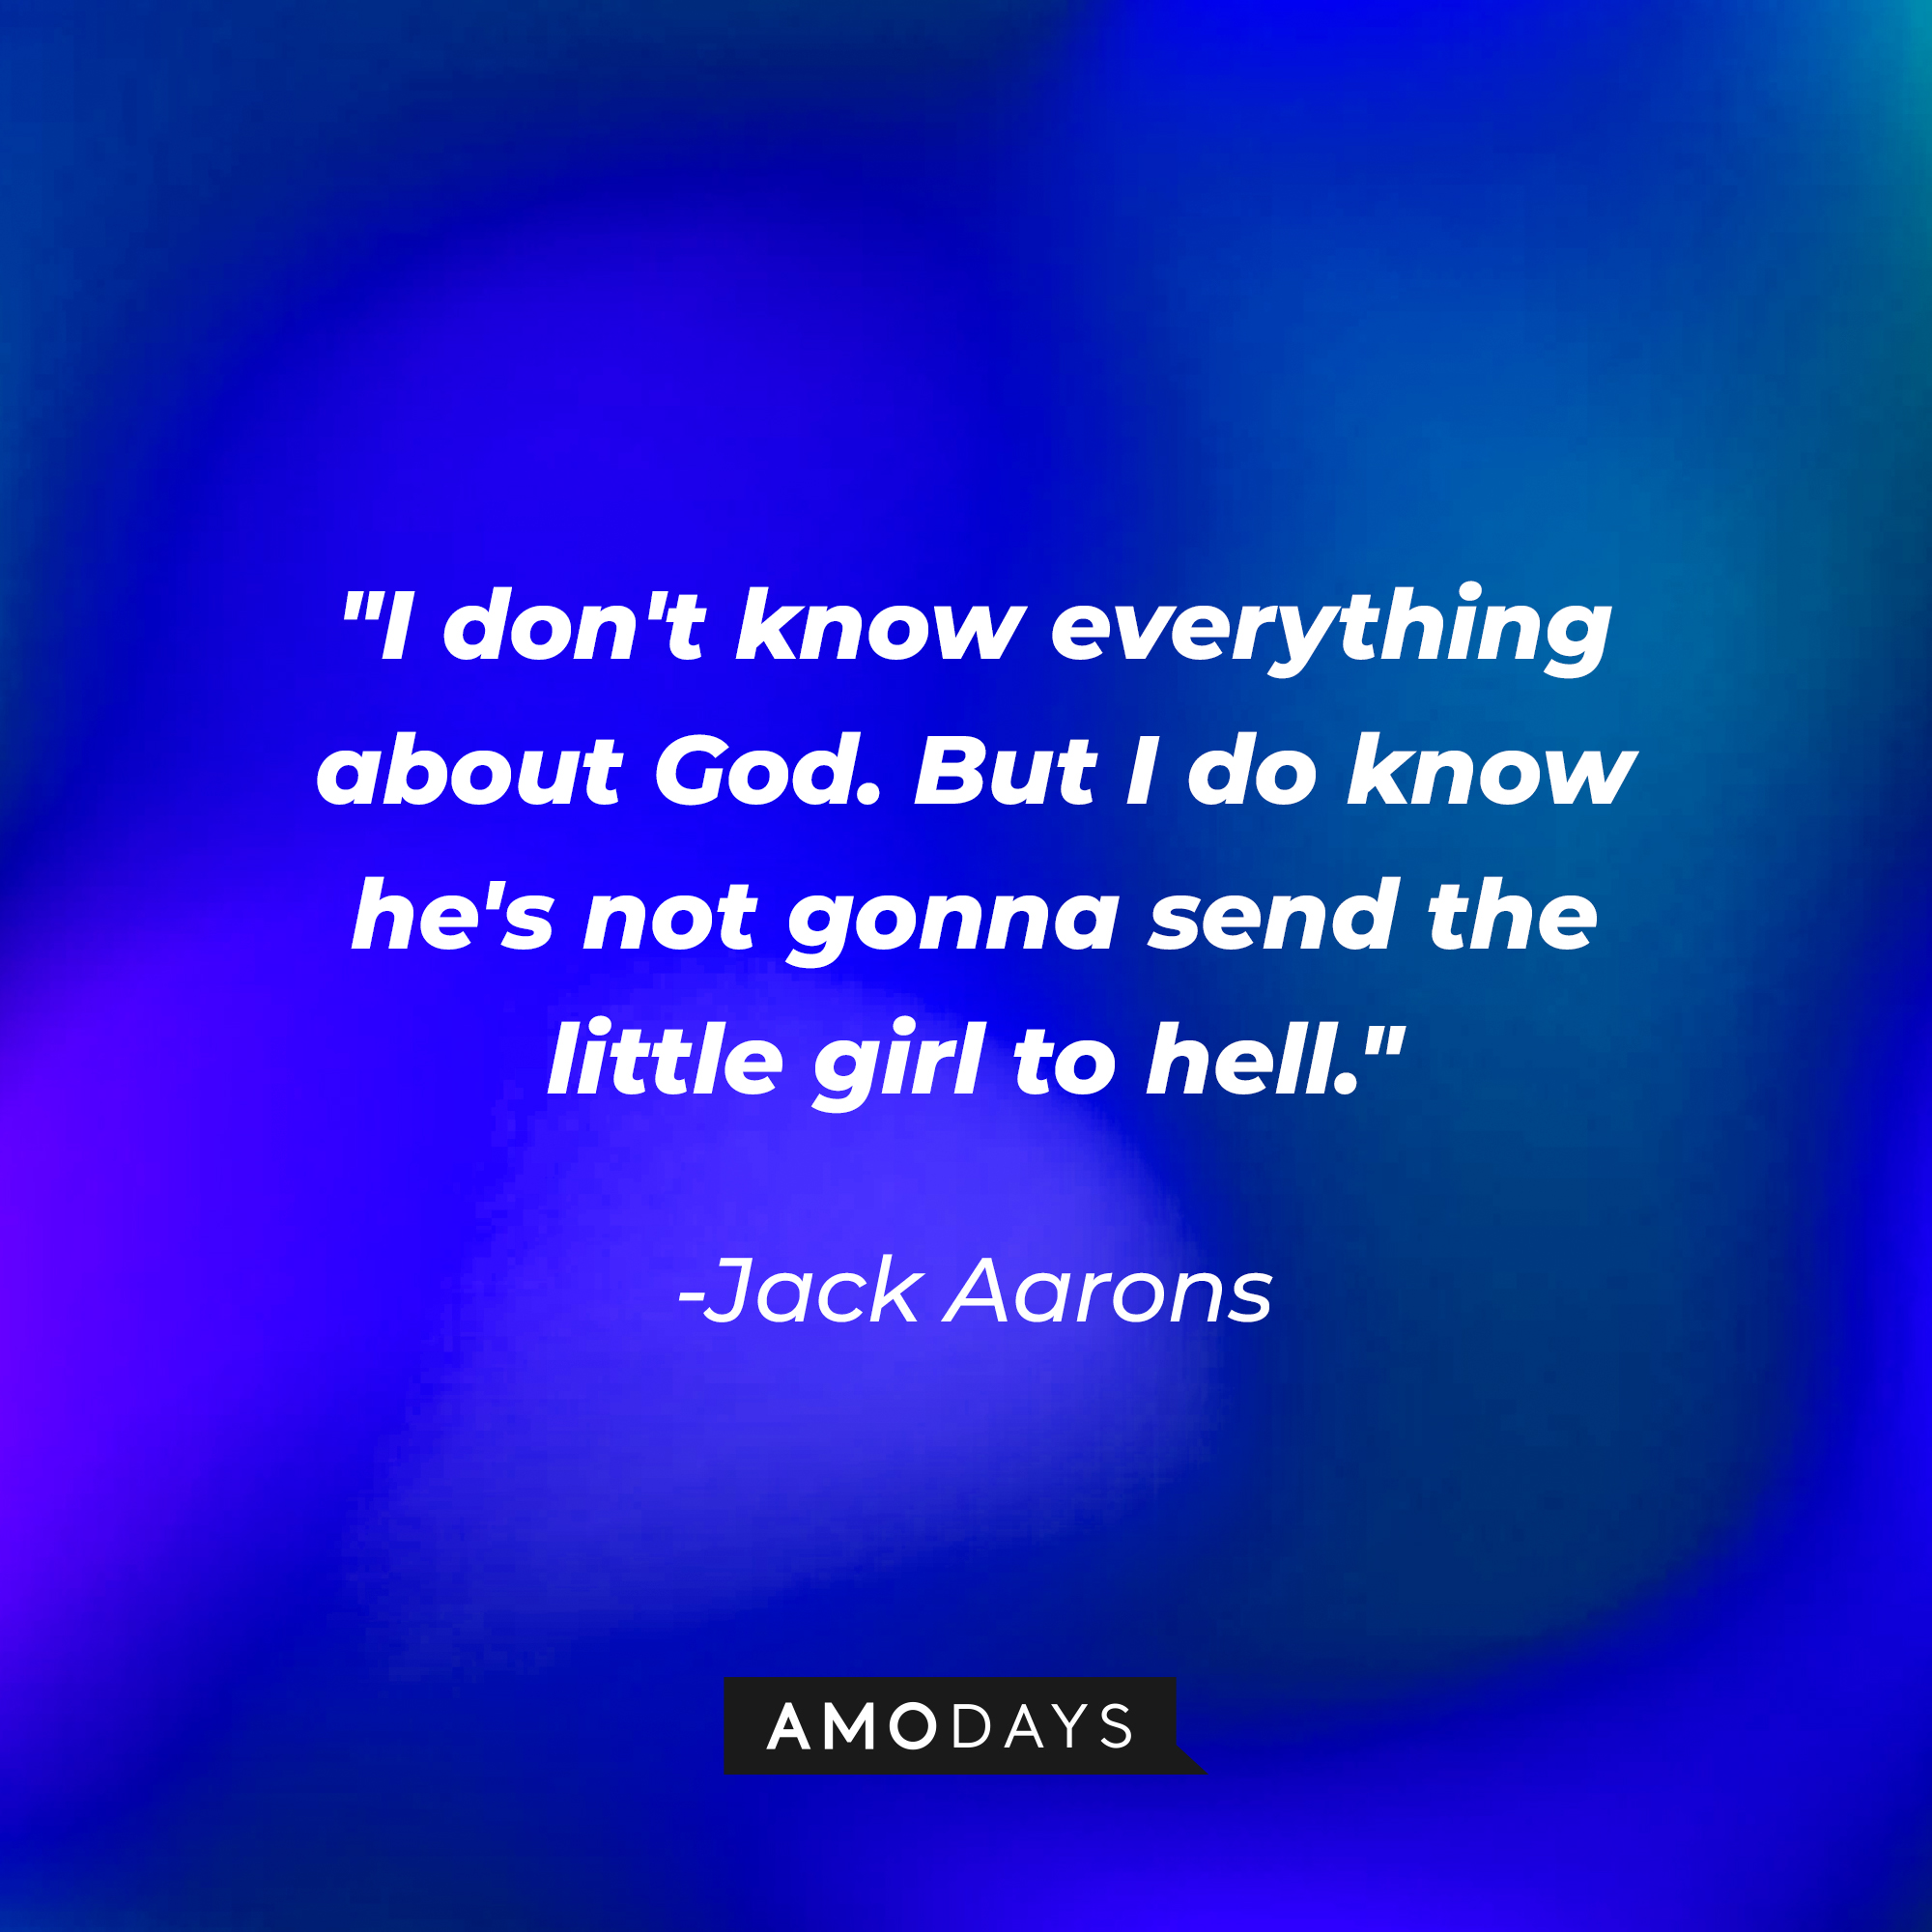 Jack Aarons' quote: "I don't know everything about God. But I do know he's not gonna send the little girl to hell." | Source: Amodays